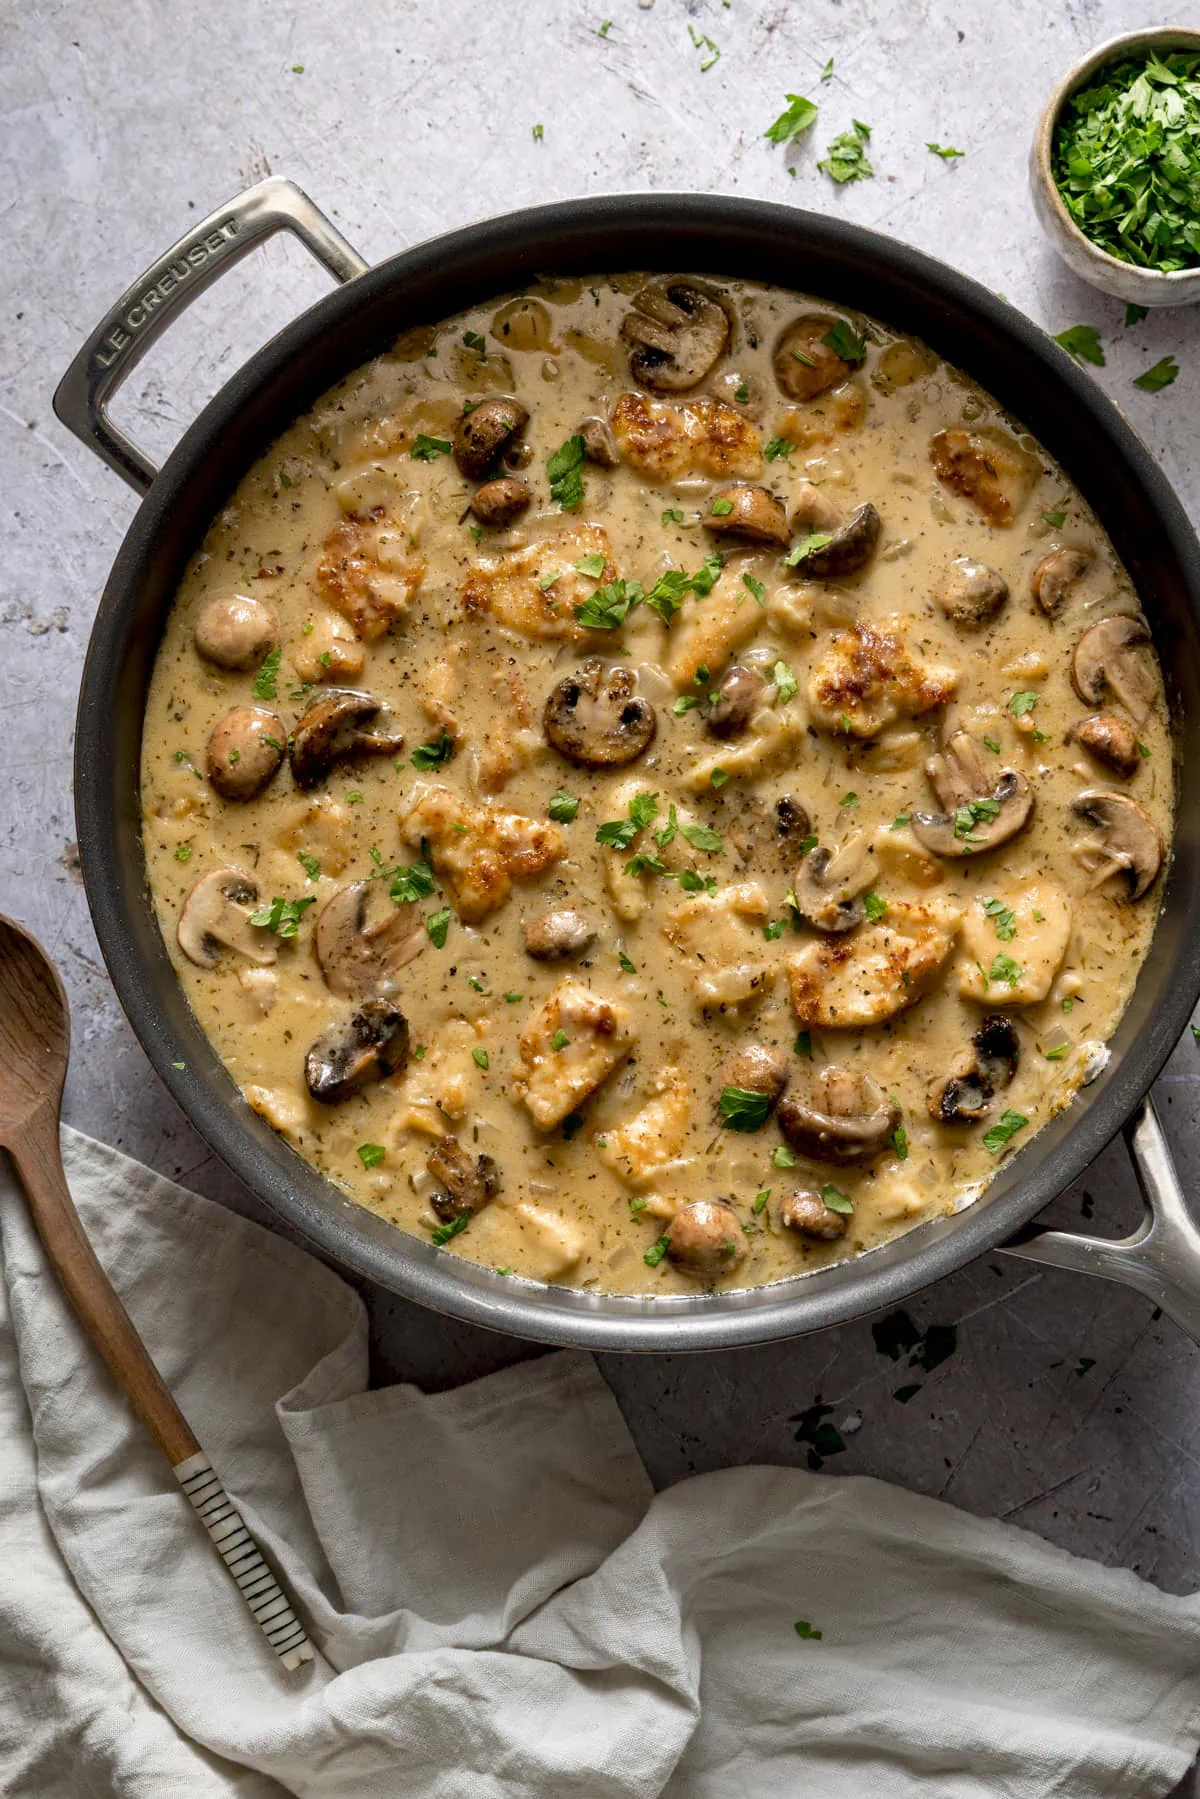 Overhead image of creamy chicken and mushroom casserole in a large frying pan on a light background. There is a cream linen napkin and a wooden spoon next to the pan and parsley scattered in and around the pan.